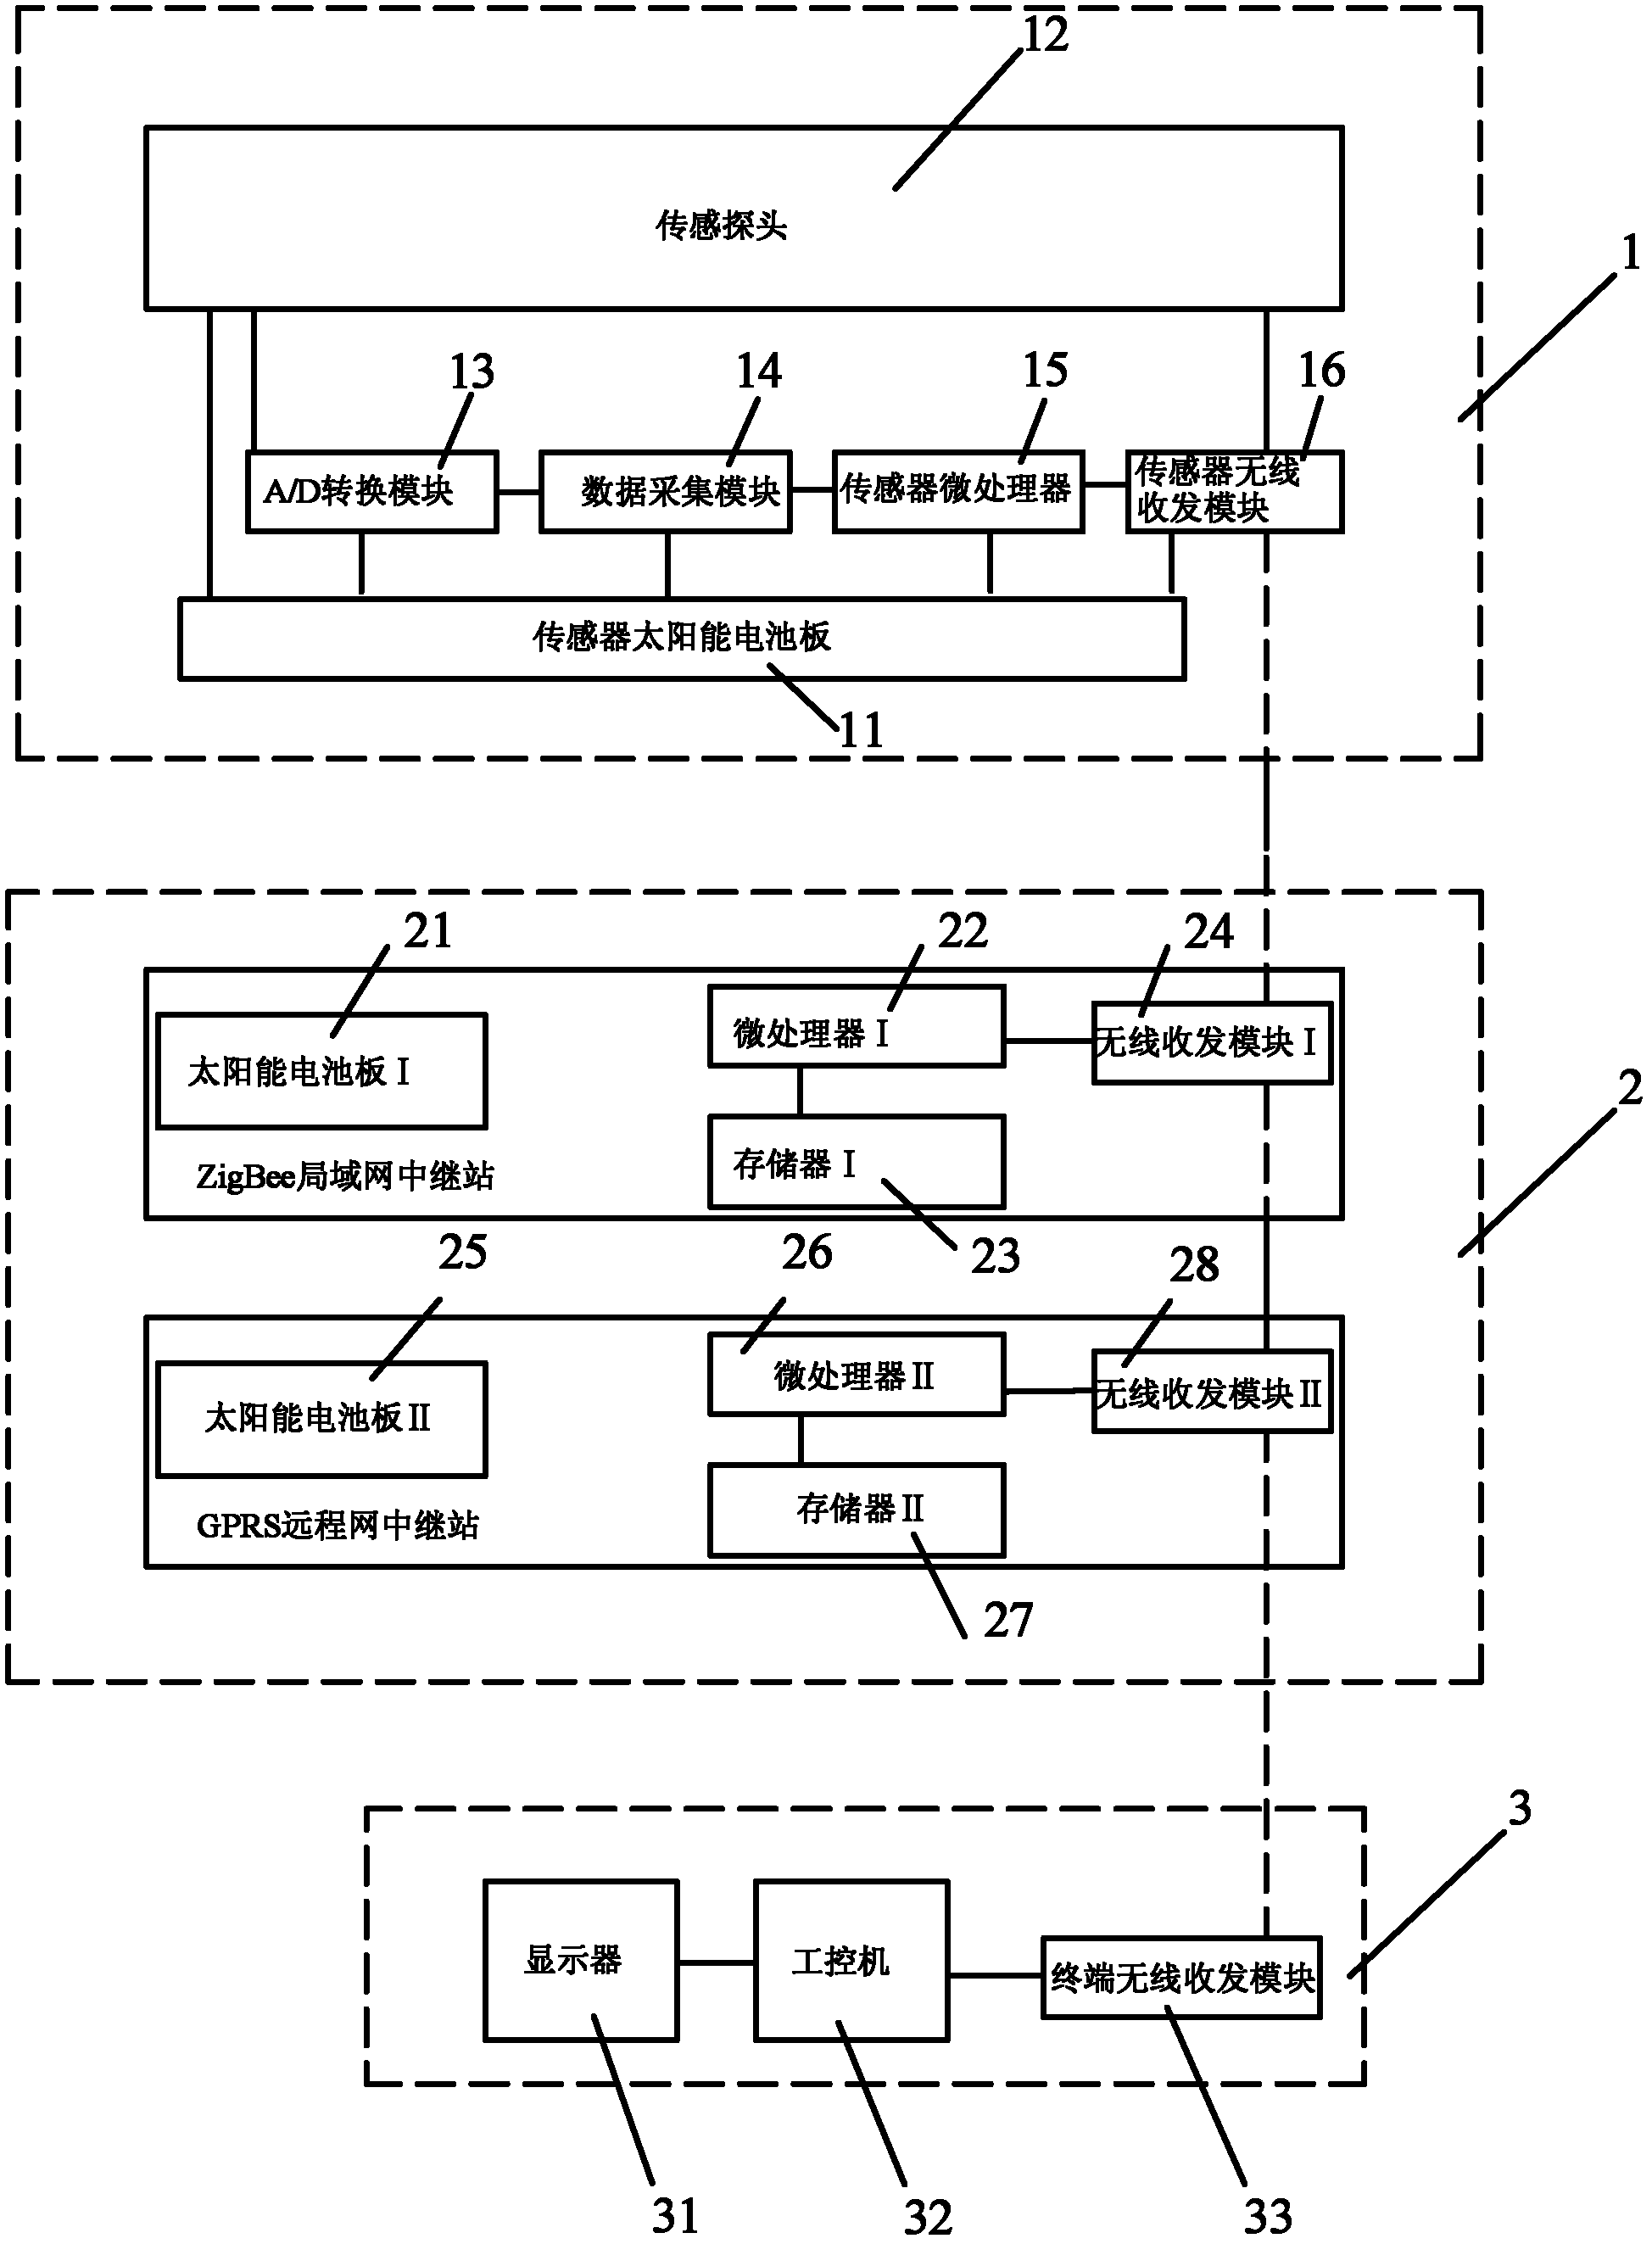 Multi-parameter integrated COD (Chemical Oxygen Demand) water quality monitoring system and monitoring method thereof